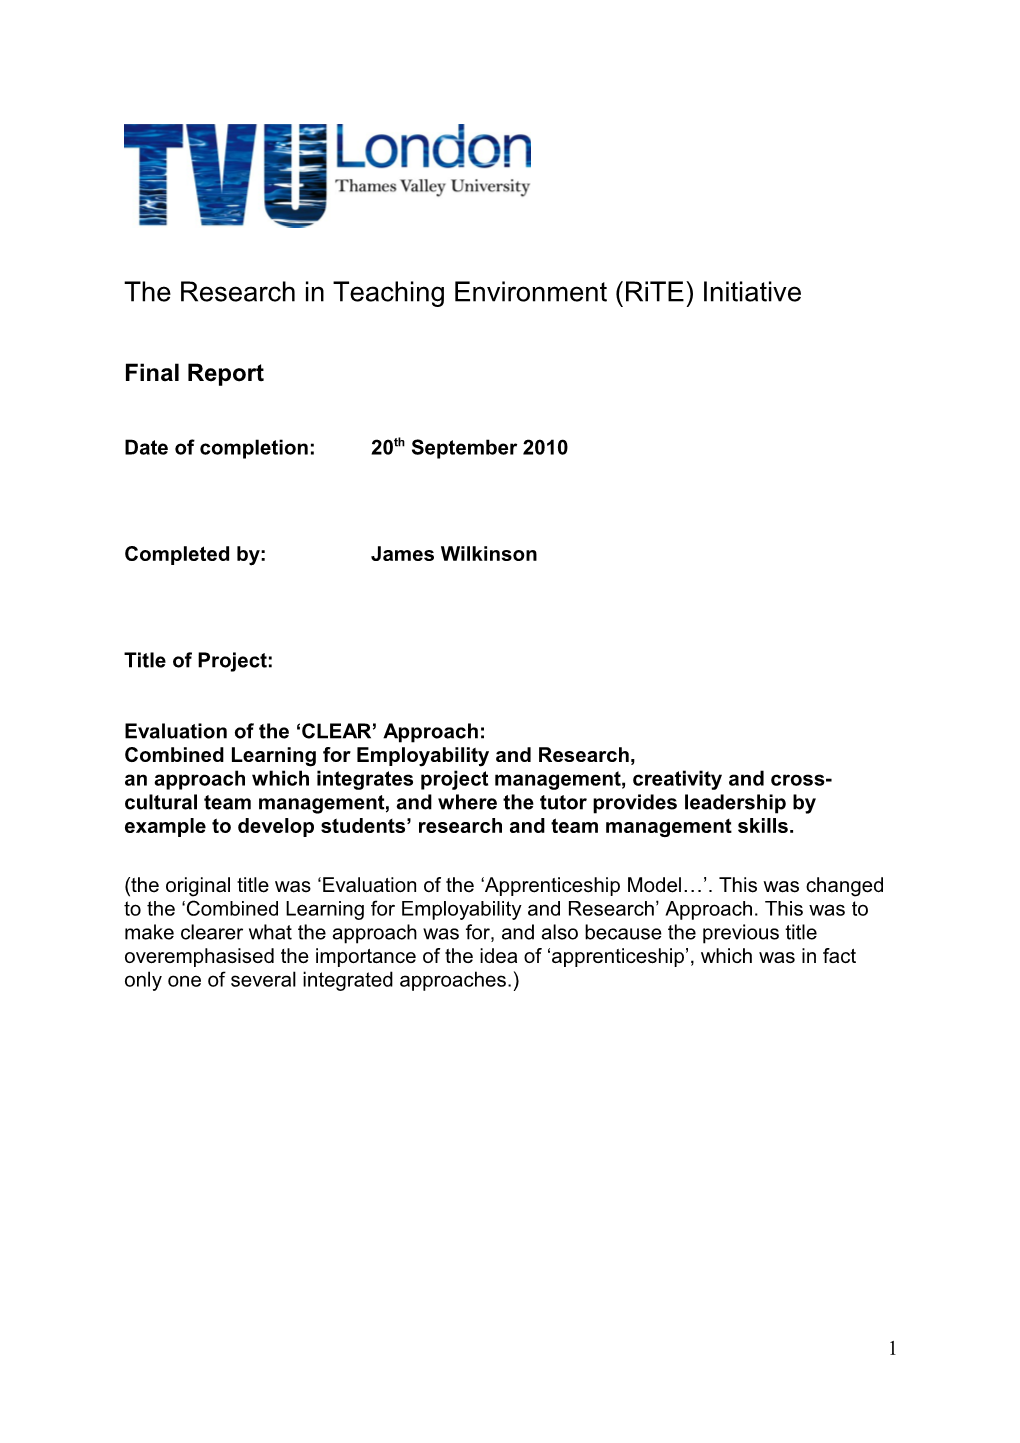 The Research in Teaching Environment (Rite) Initiative